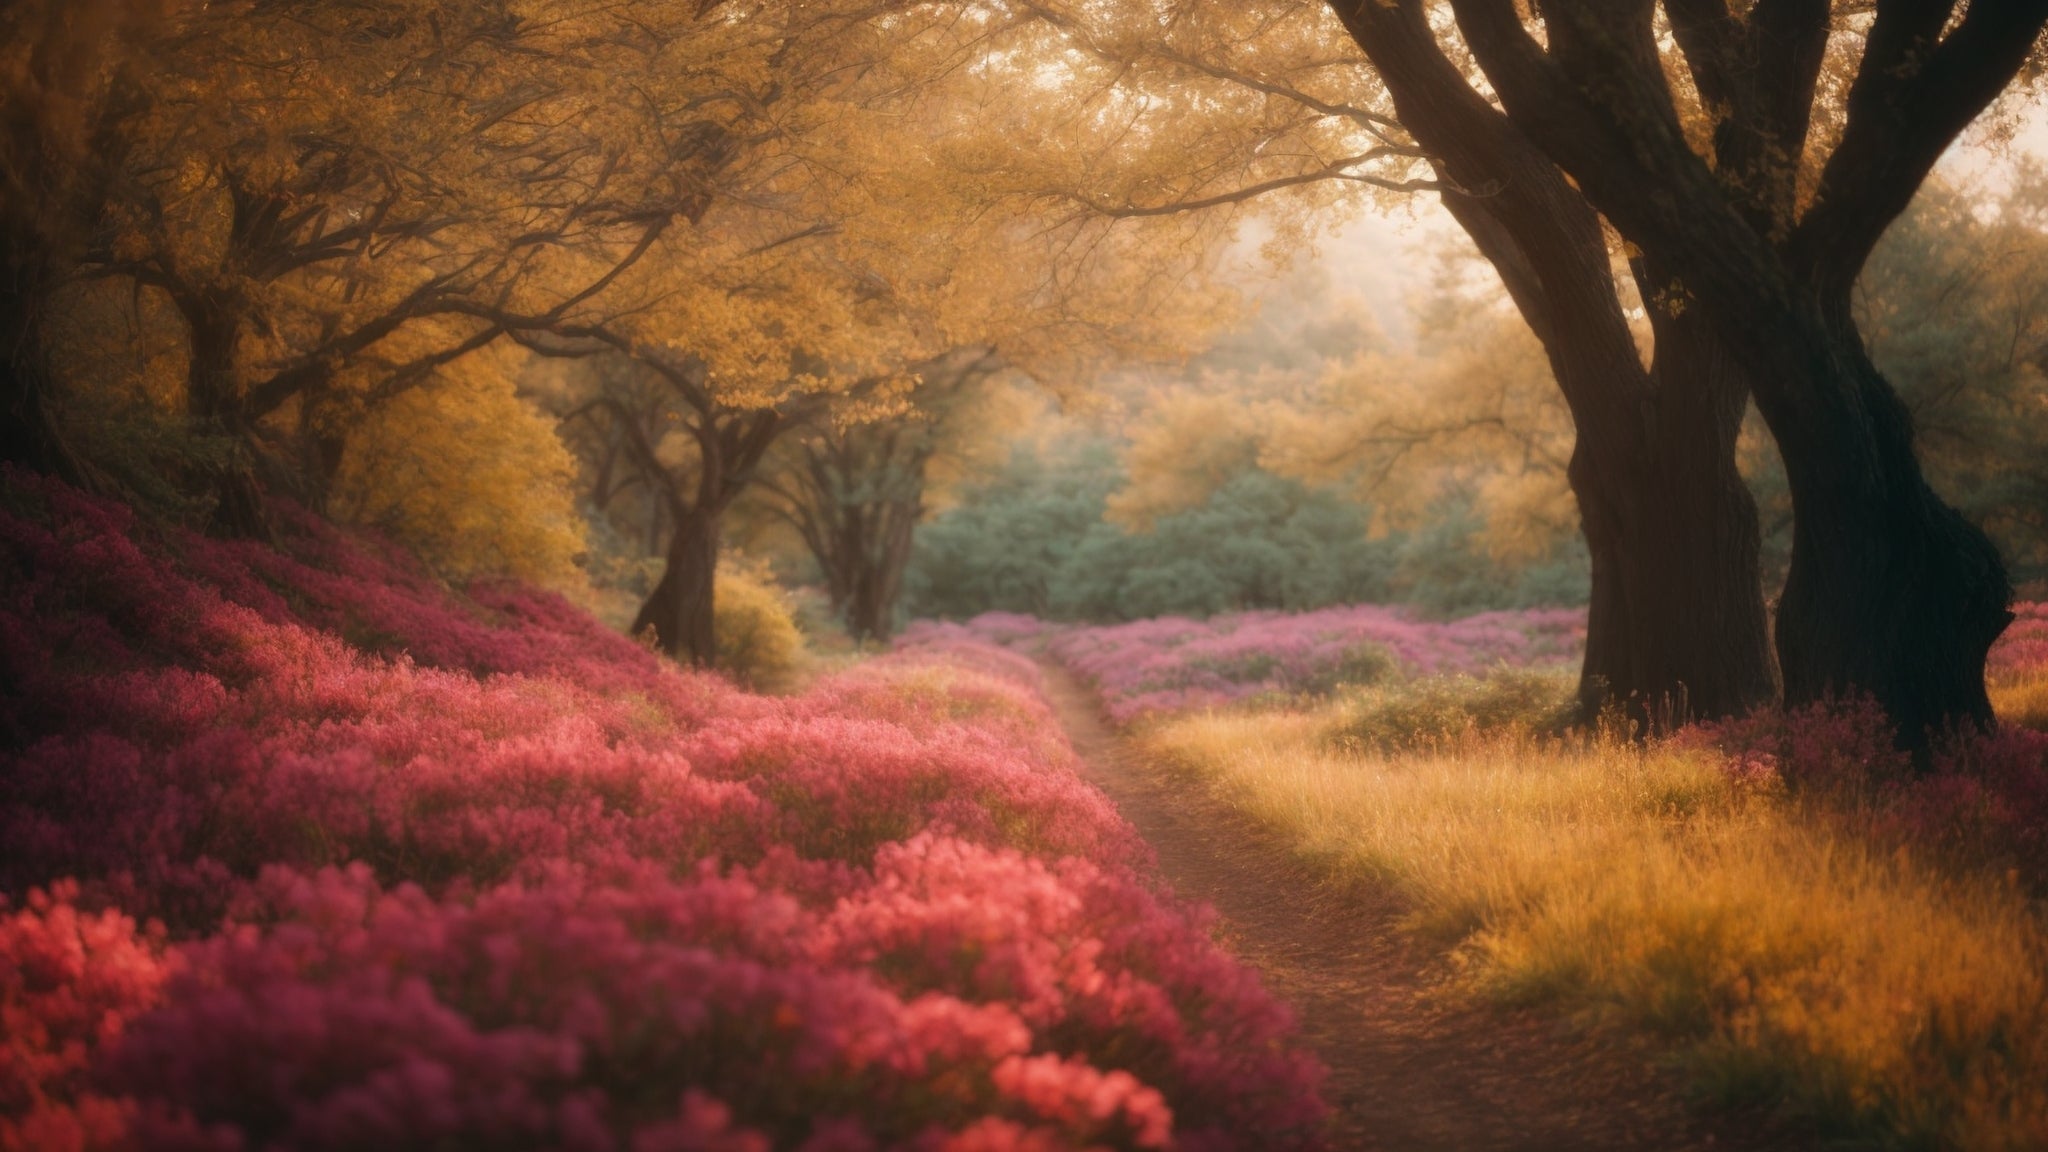 Picture of nature with background on flowers that are pink and yellow sitting under trees with yellow leafs